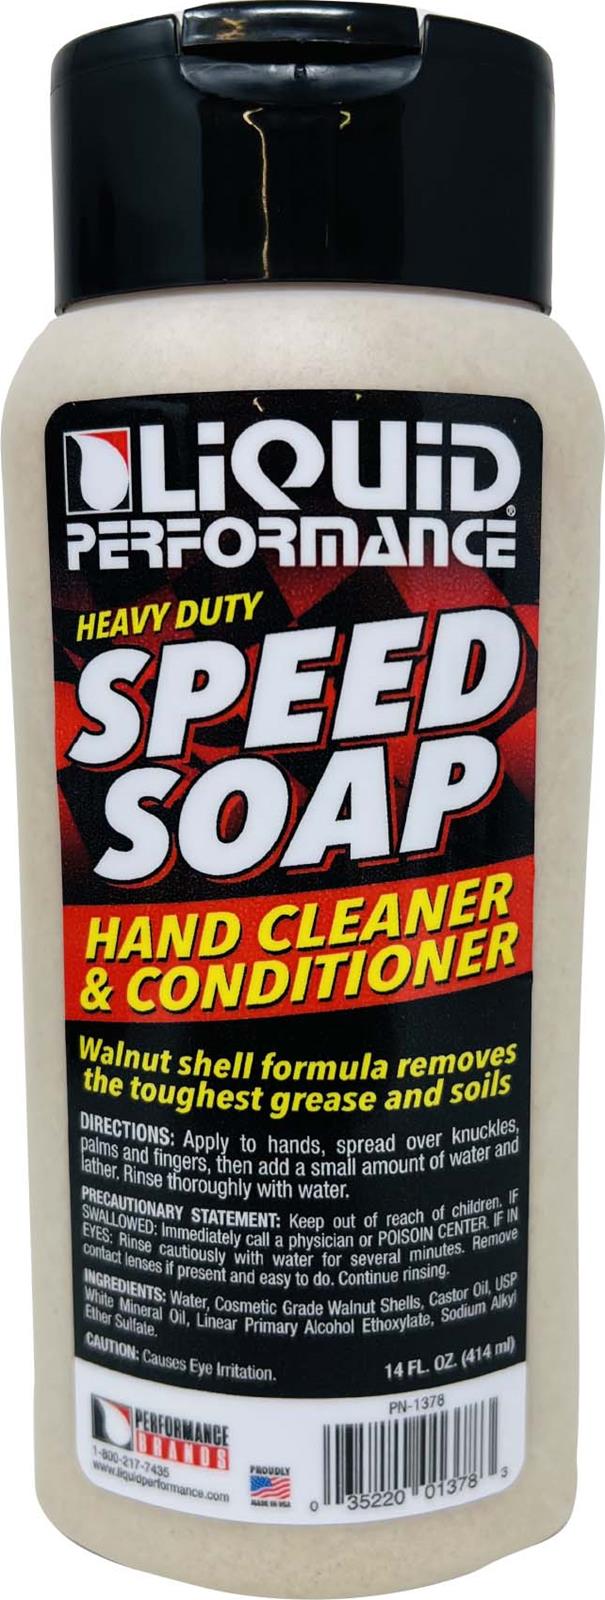 Speed Soap Hand Cleaner & Conditioner